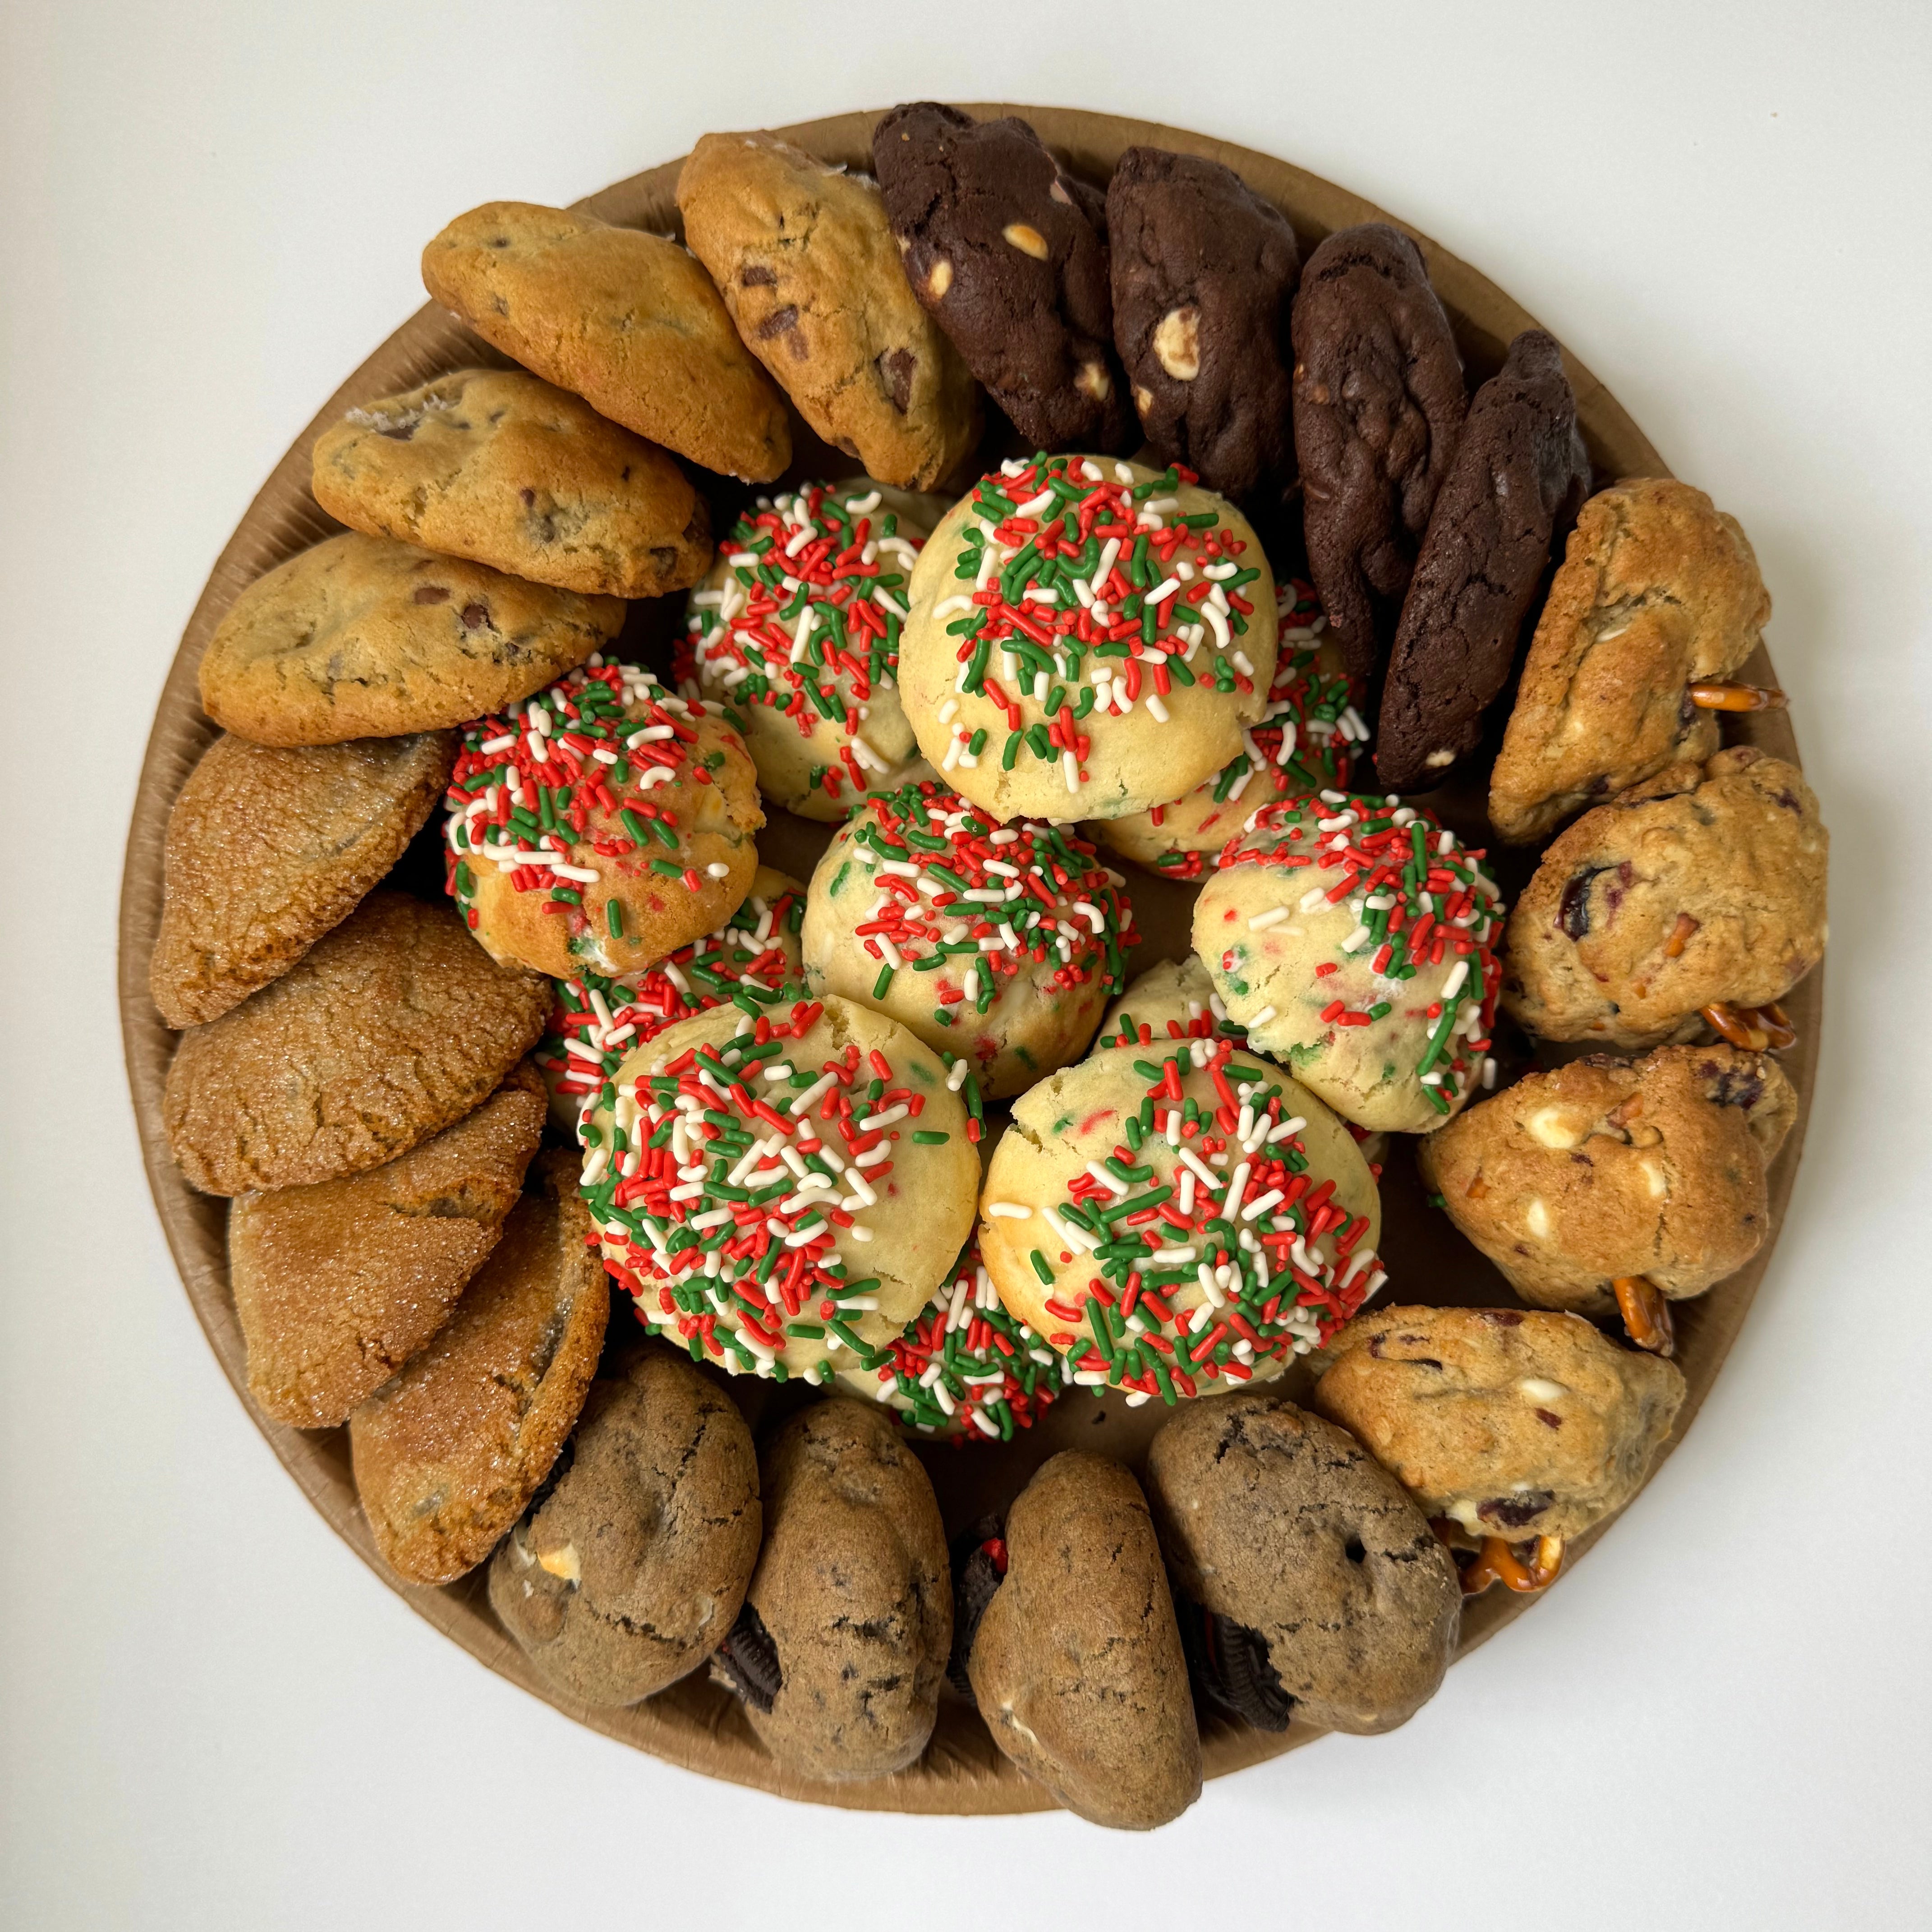 Large Party Tray - $59 (100 - 1 oz. cookies) - Mary's Mountain Cookies